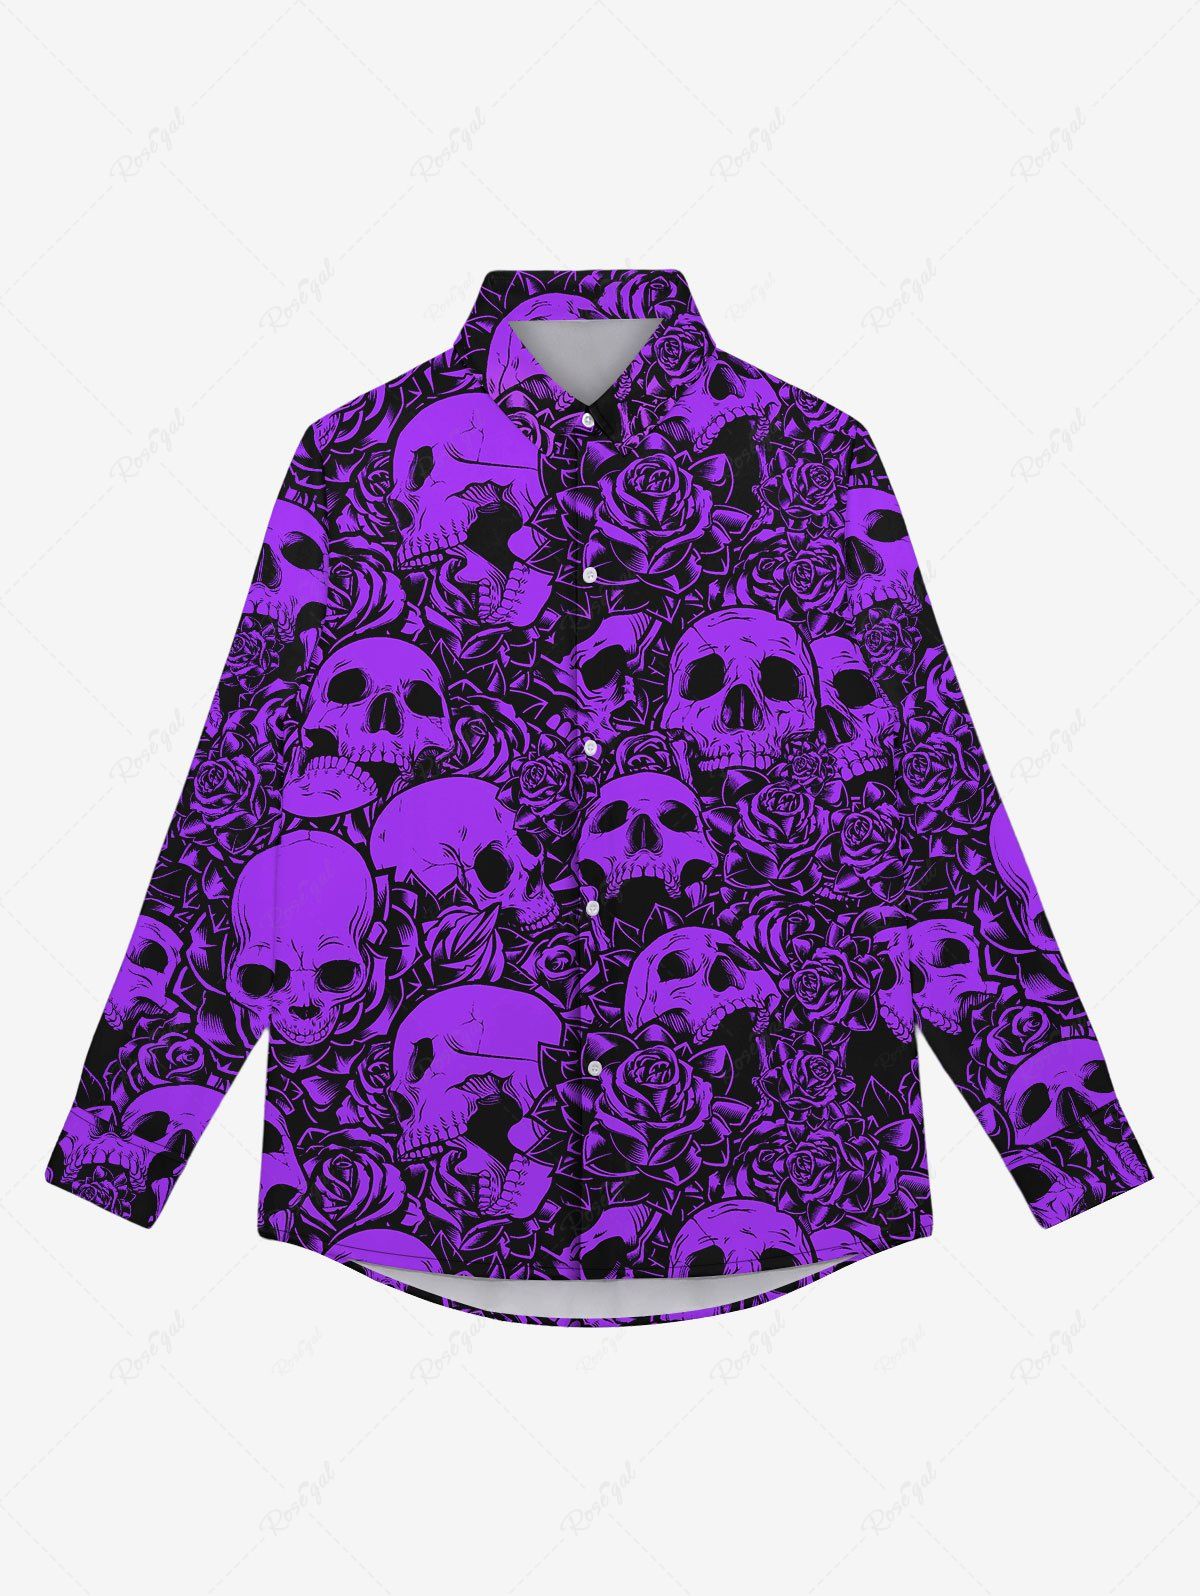 Chic Gothic Valentine's Day Skulls Rose Flowers Print Button Down Shirt For Men  